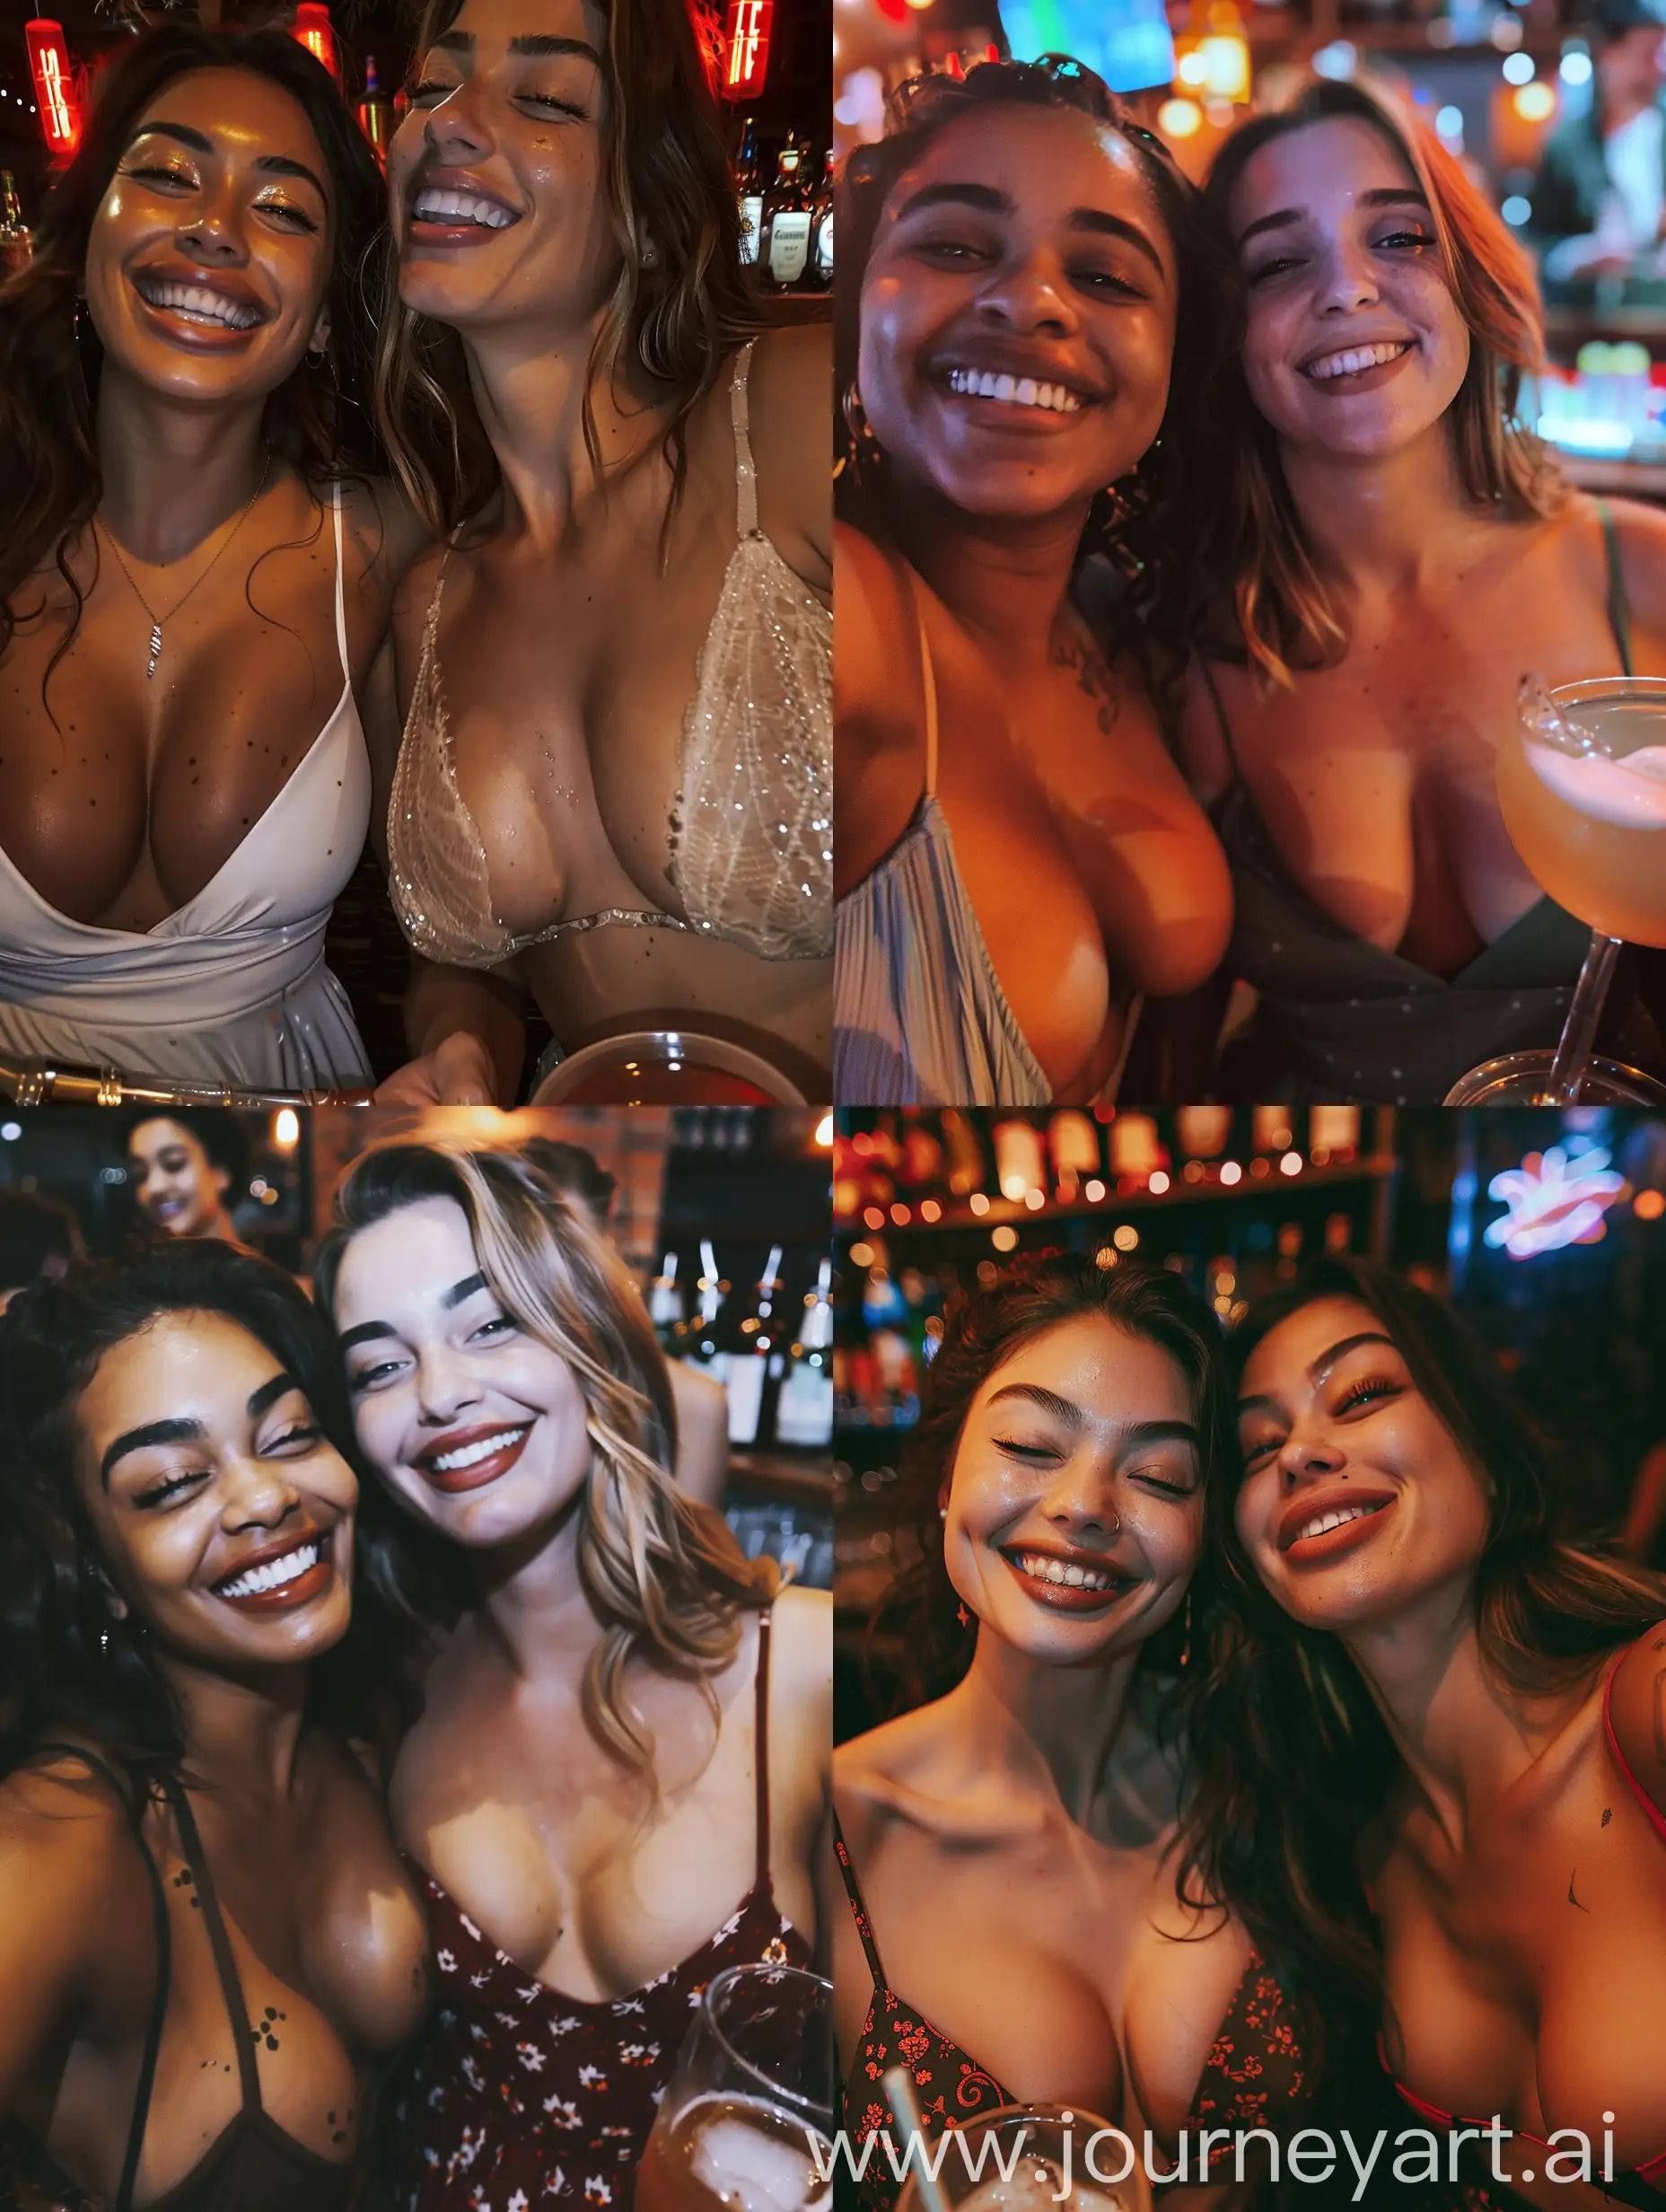 Aesthetic Instagram selfie of two women having a drink at a bar, dresses, having fun, laughing, close up selfie, party atmosphere, at night, realistic lighting, slightly big chest, 1 black, 1 white